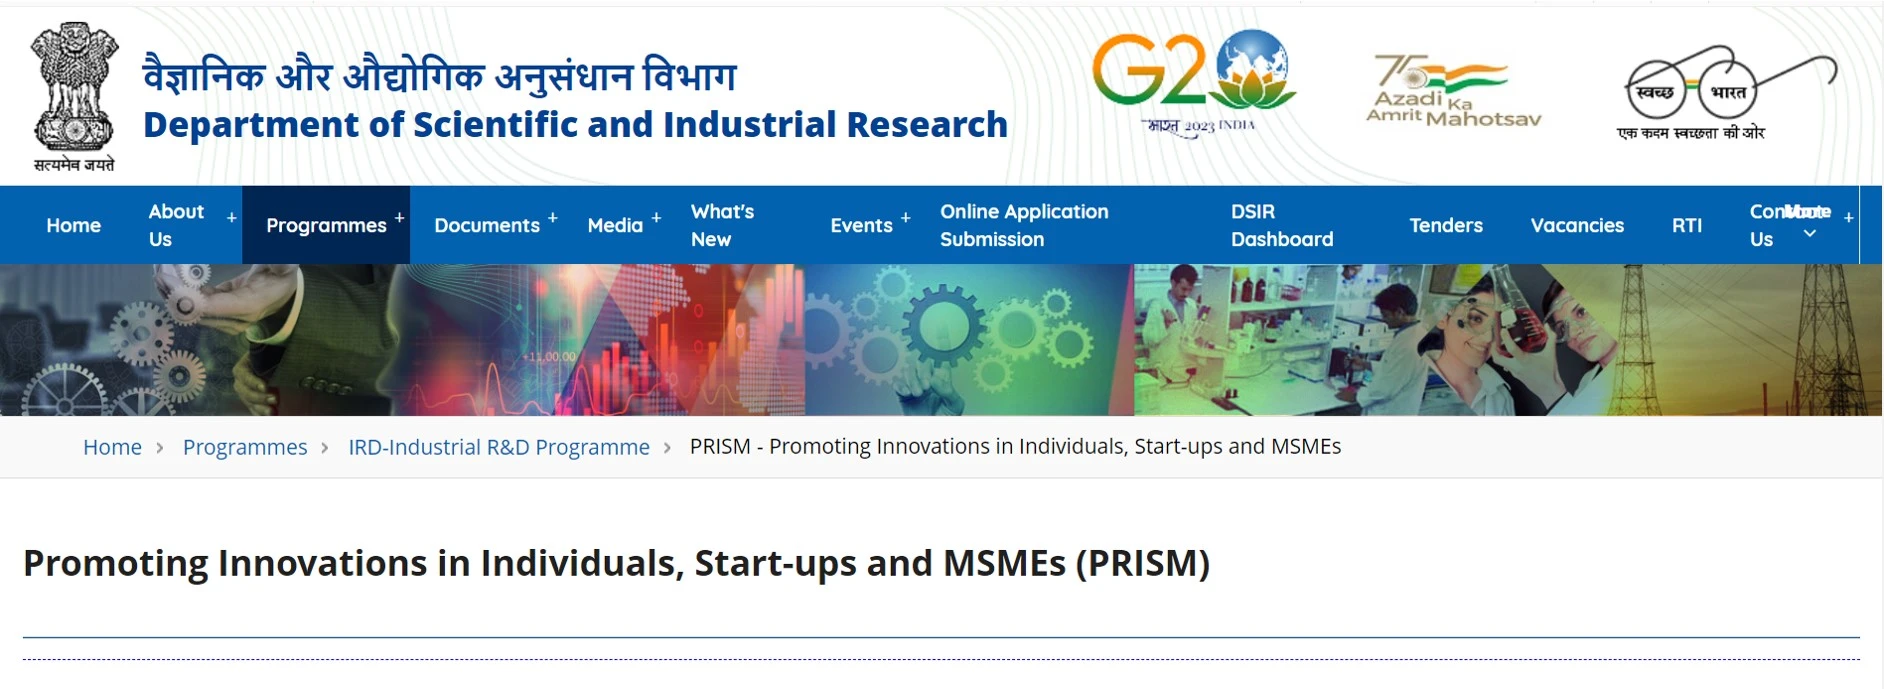 Promoting-Innovations-in-Individuals-Startups-MSMEs-PRISM